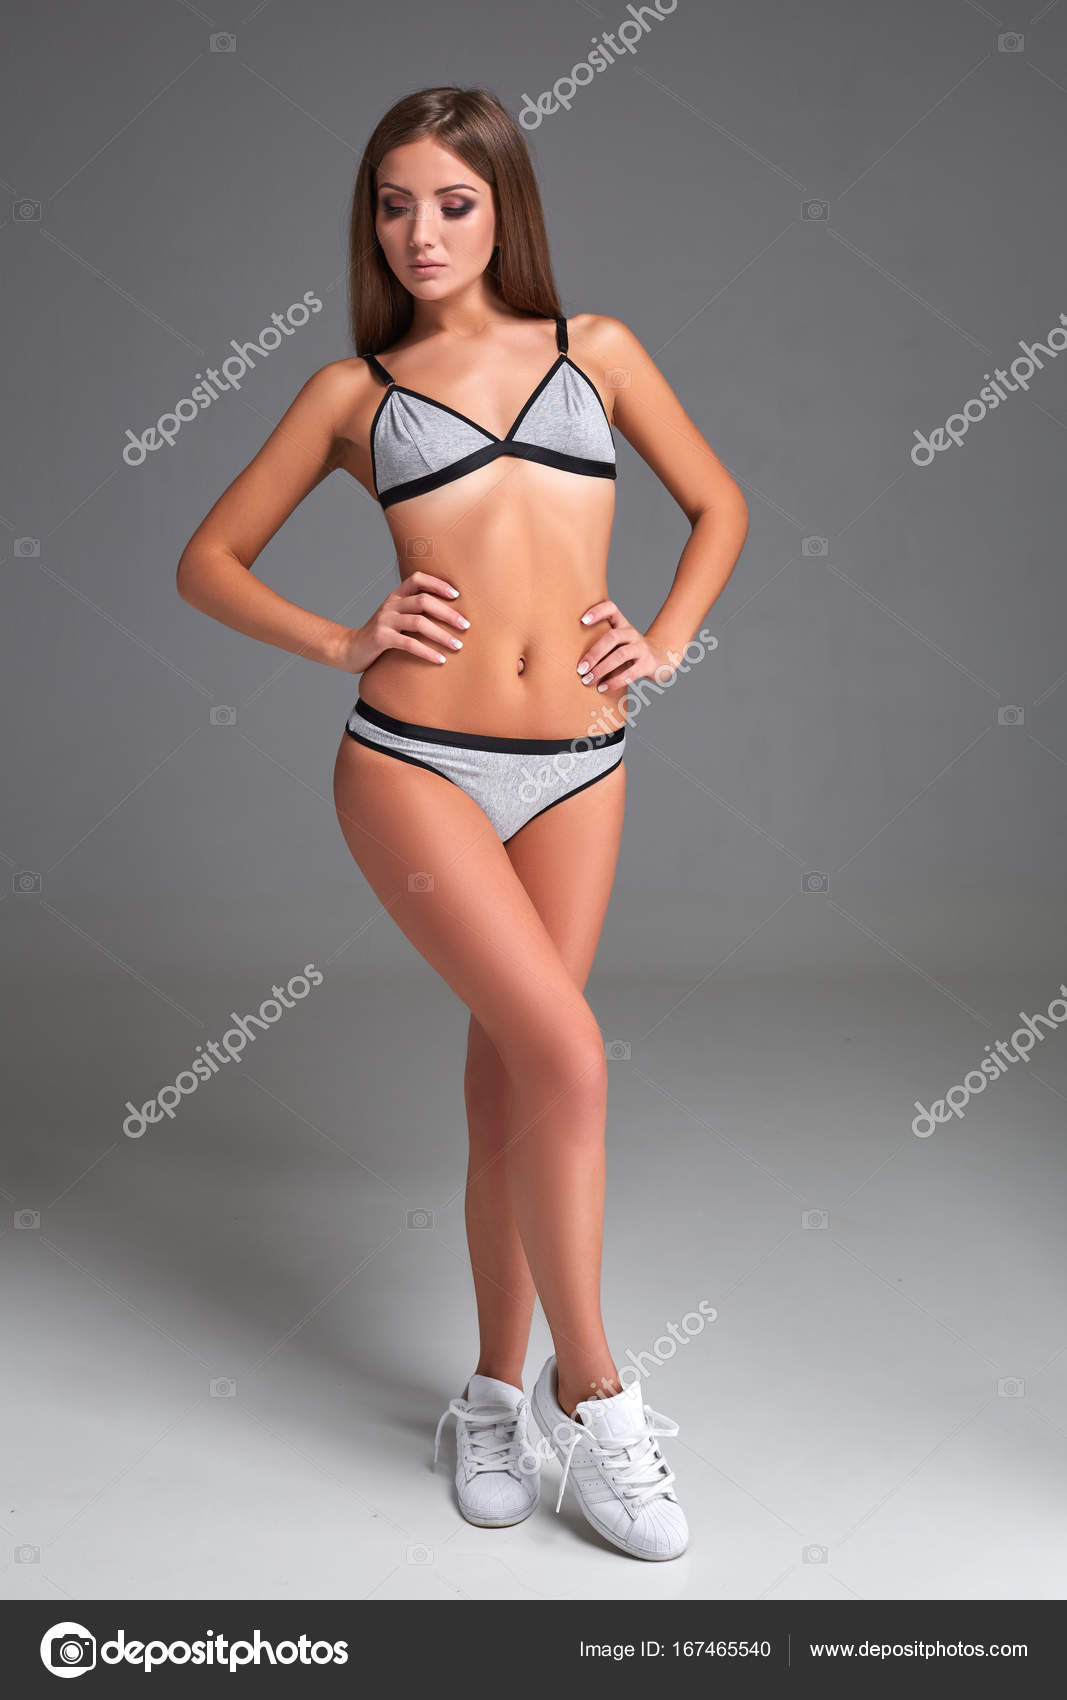 Beautiful girl in sports underwear isolated on gray background